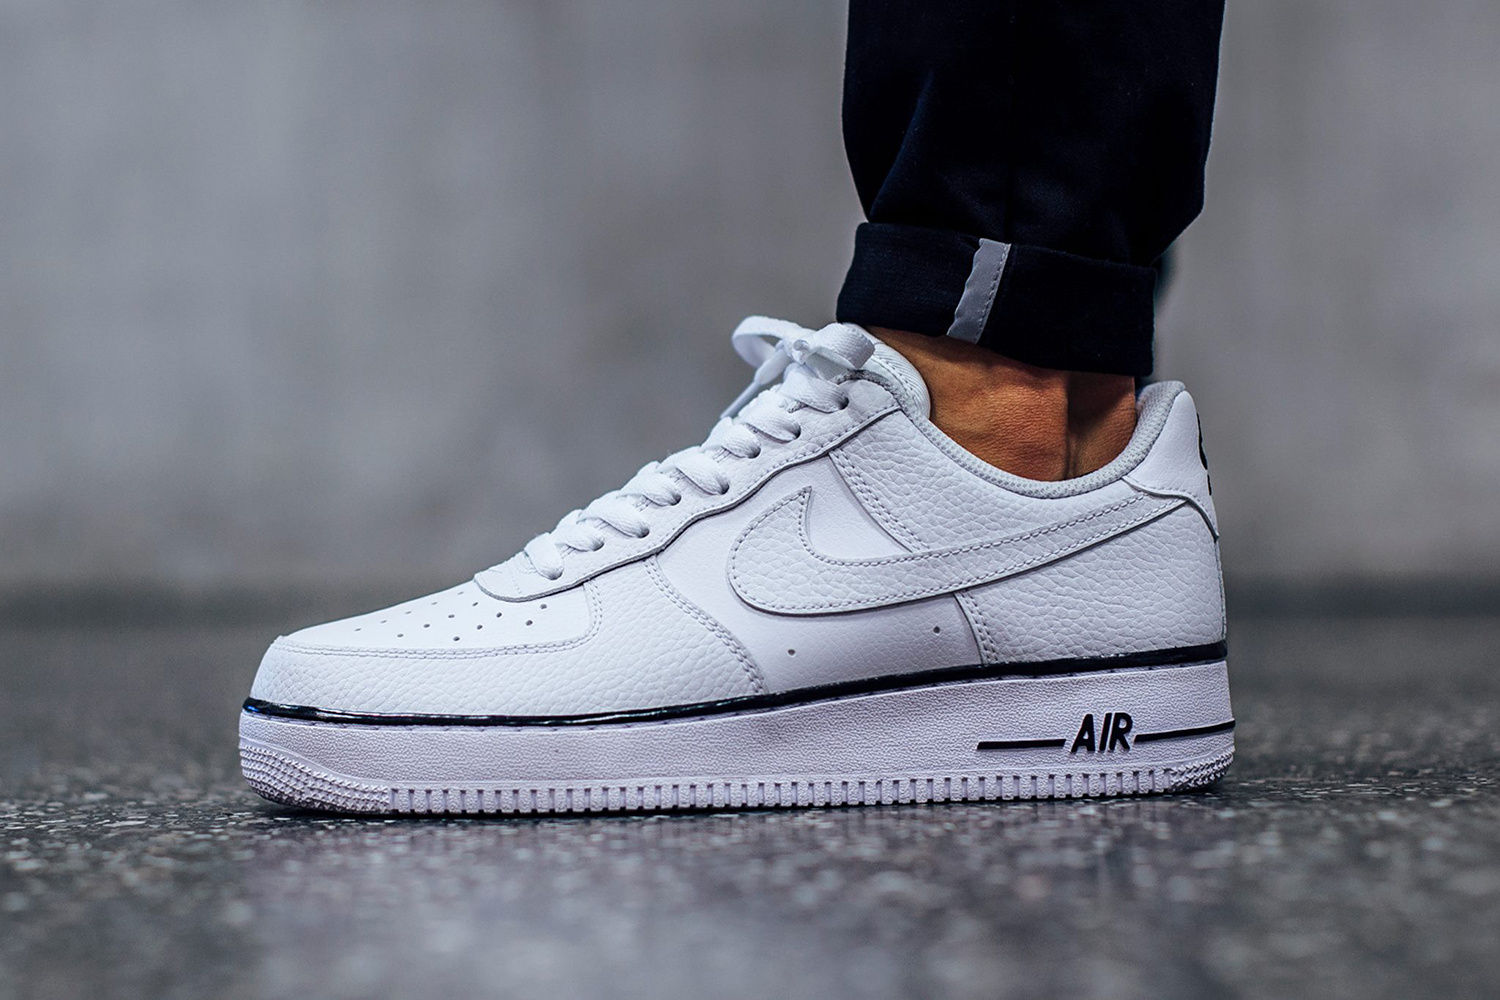 Blow Medic Emulate The history behind the hype: Nike Air Force 1s | Lifestyle Asia Singapore